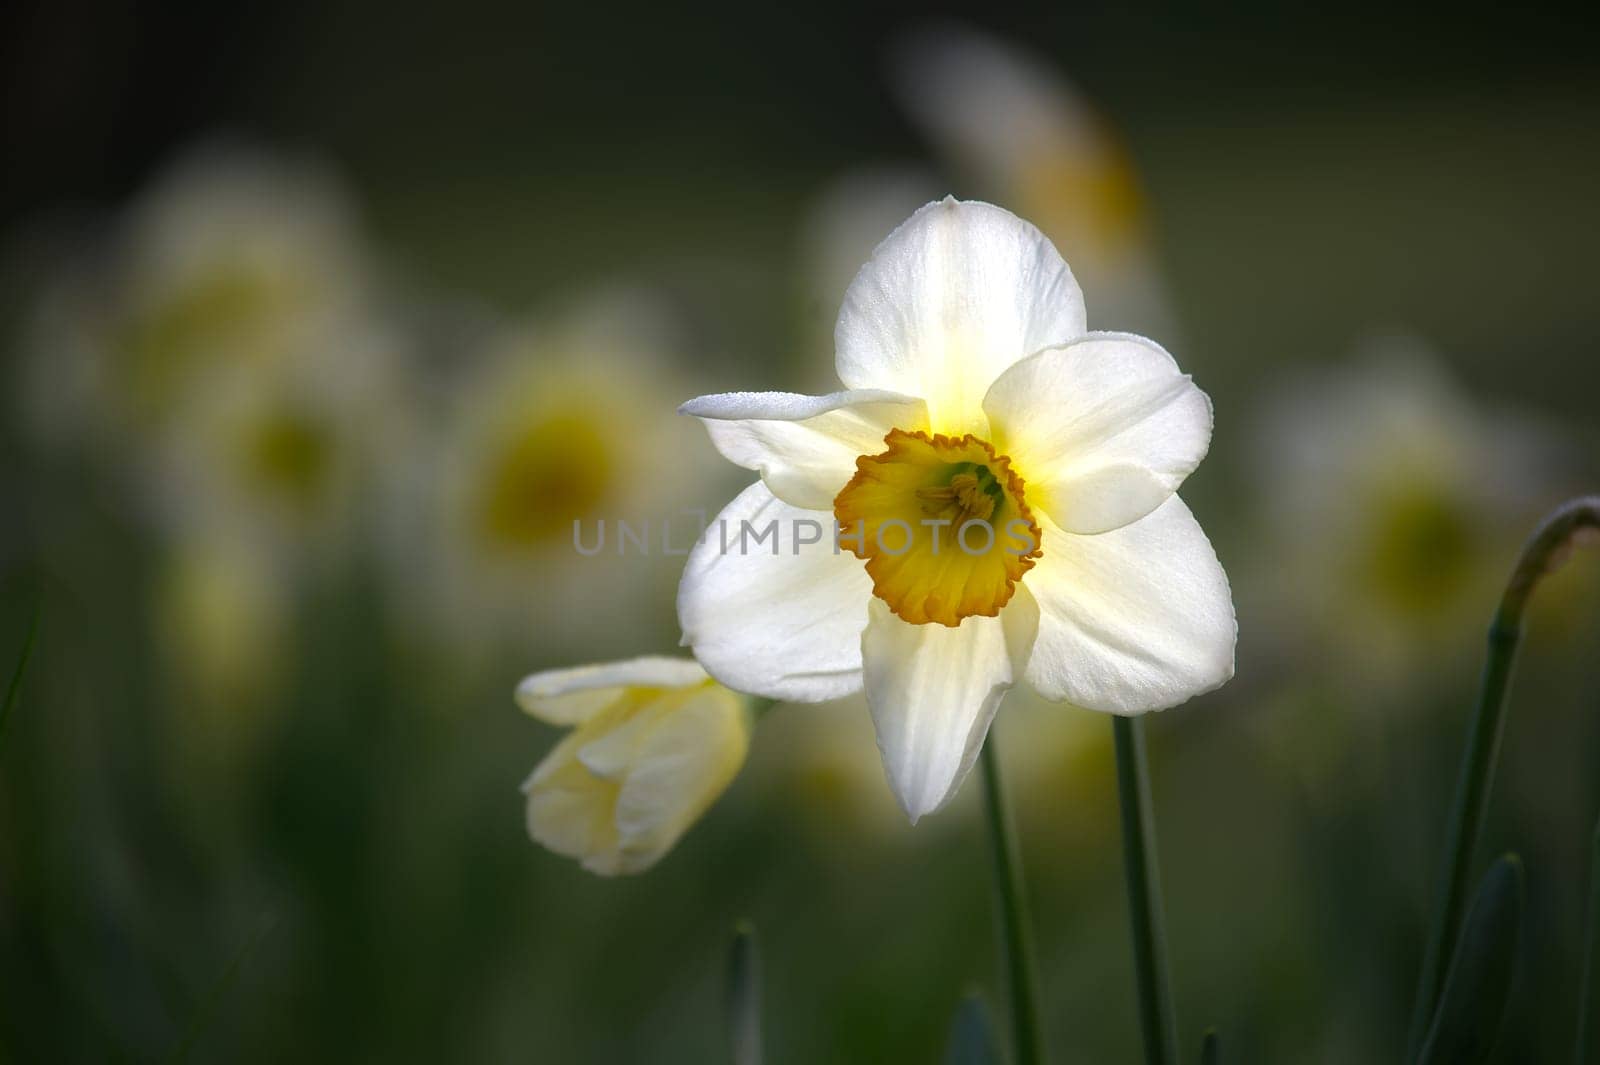 The focus on the daffodils creates a sharp contrast with the intentionally blurred background